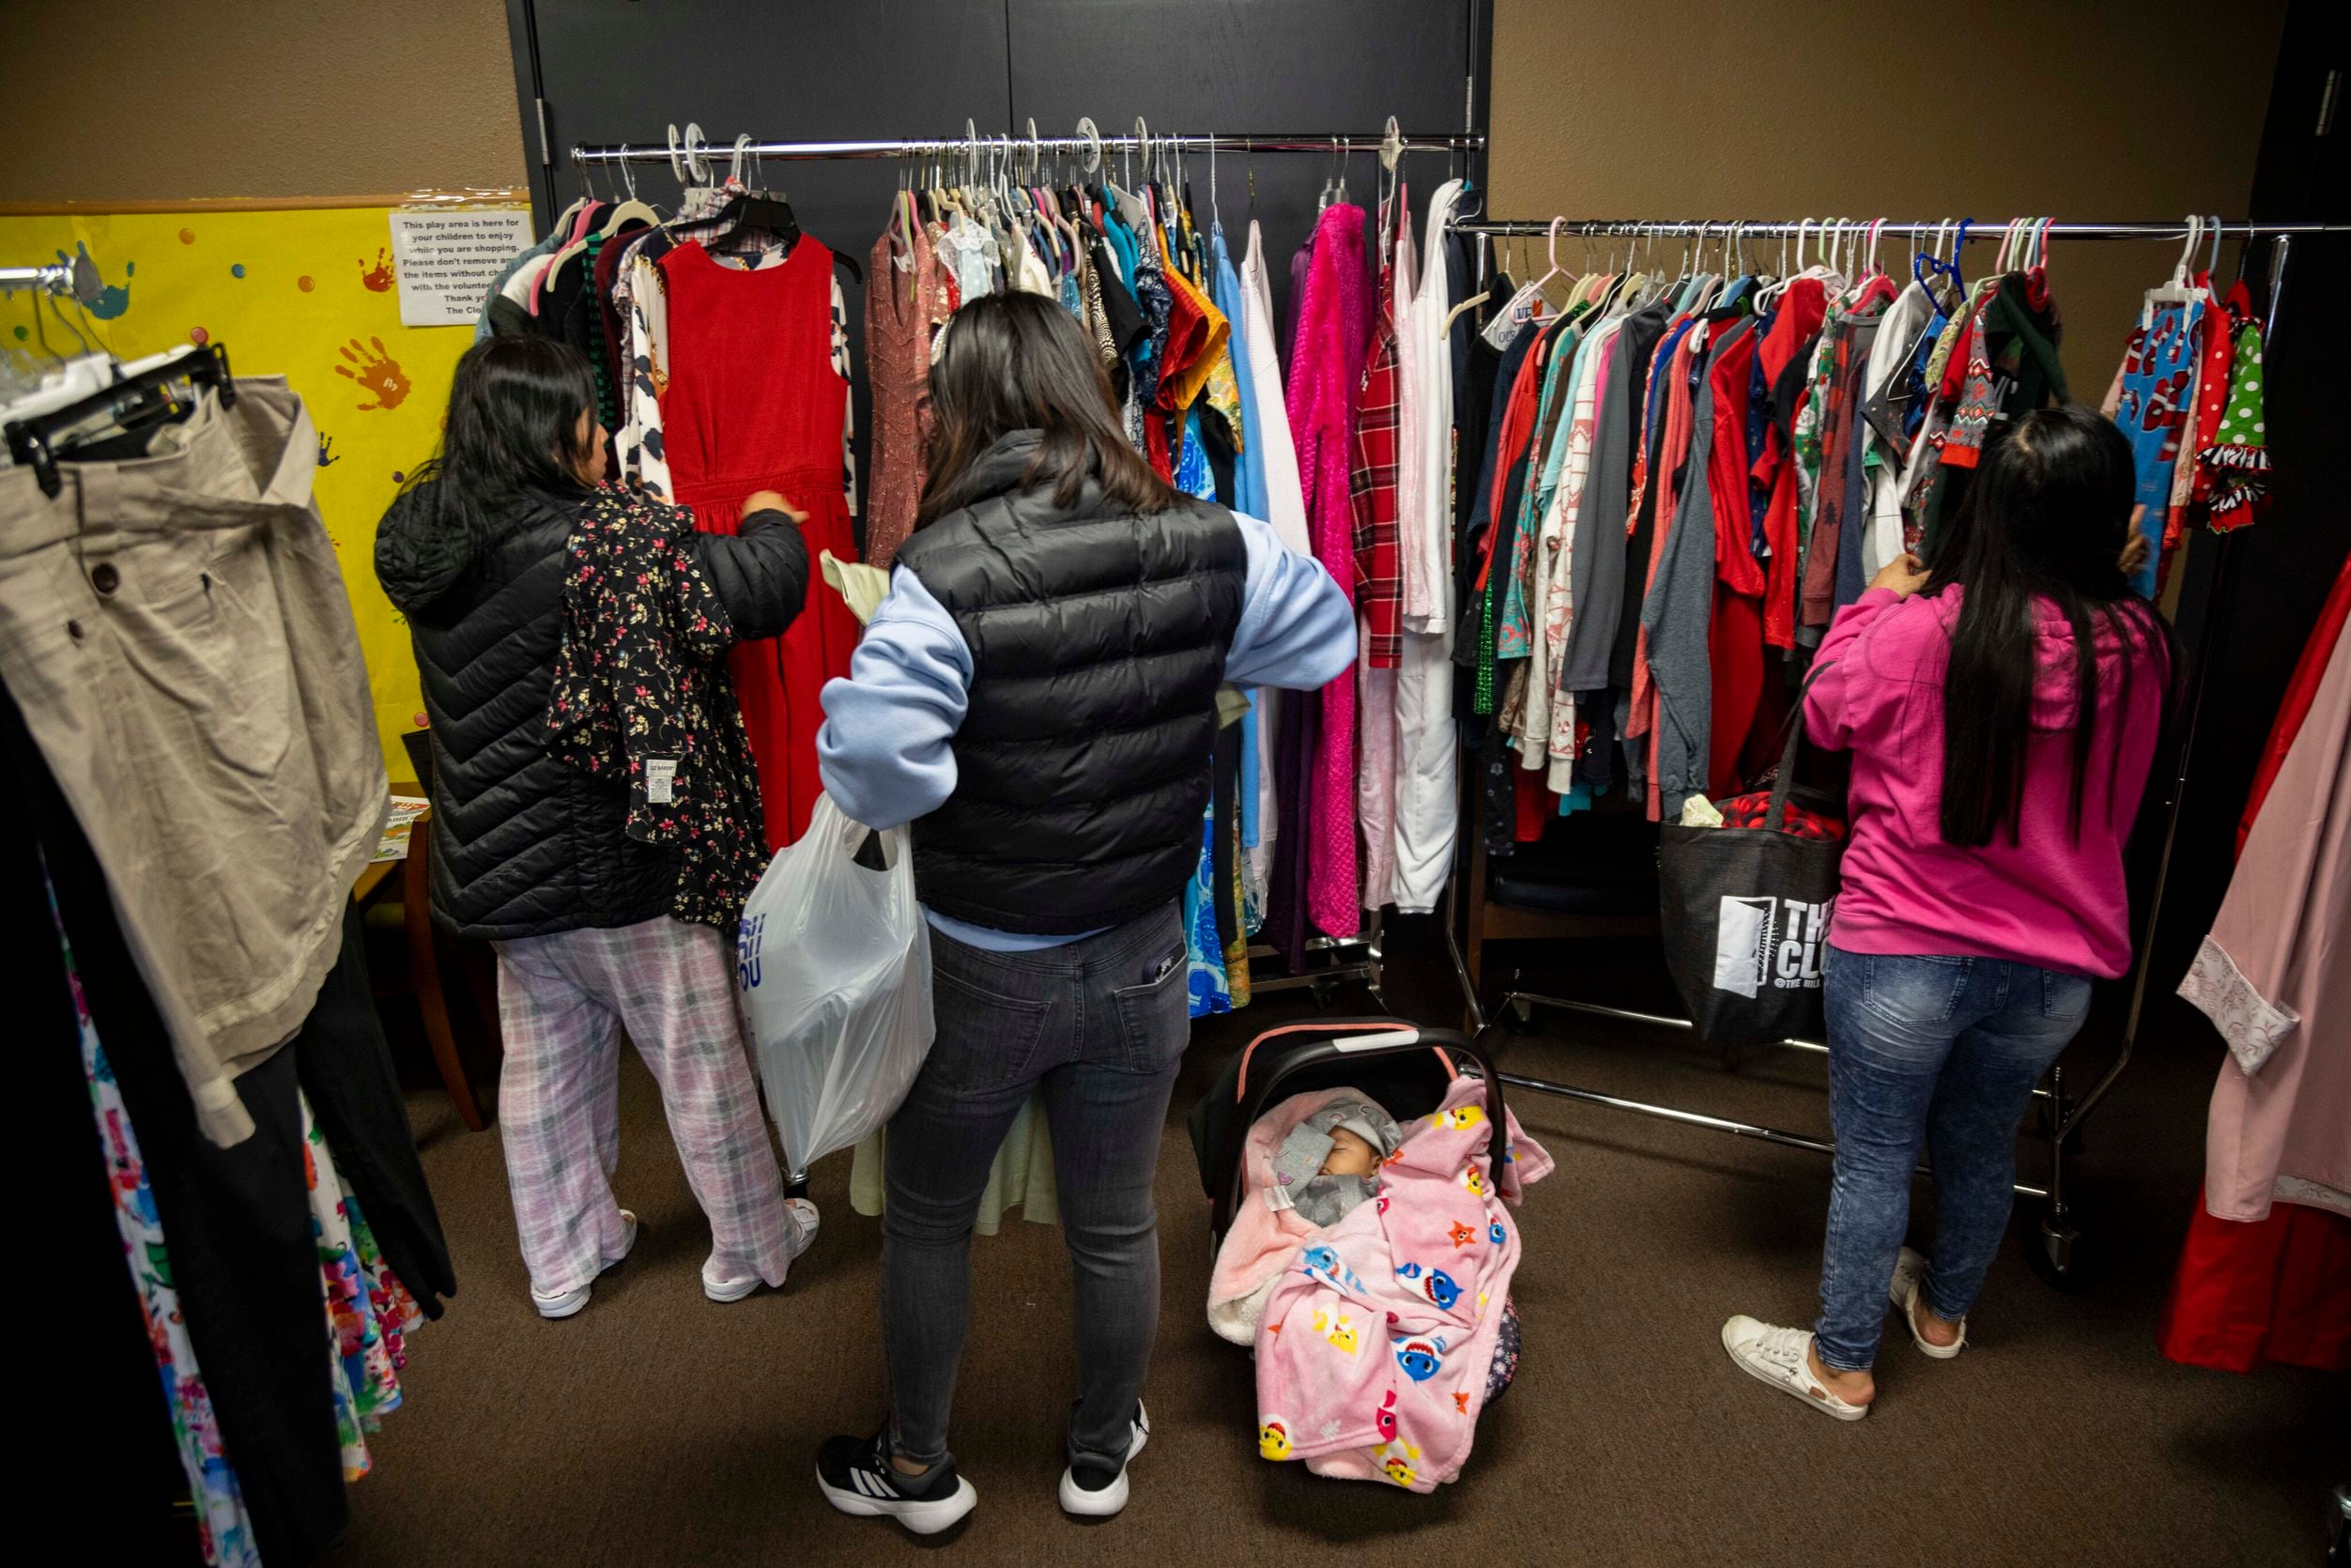 Photos: Inside The Closet at The Hill, a donation center in Plano